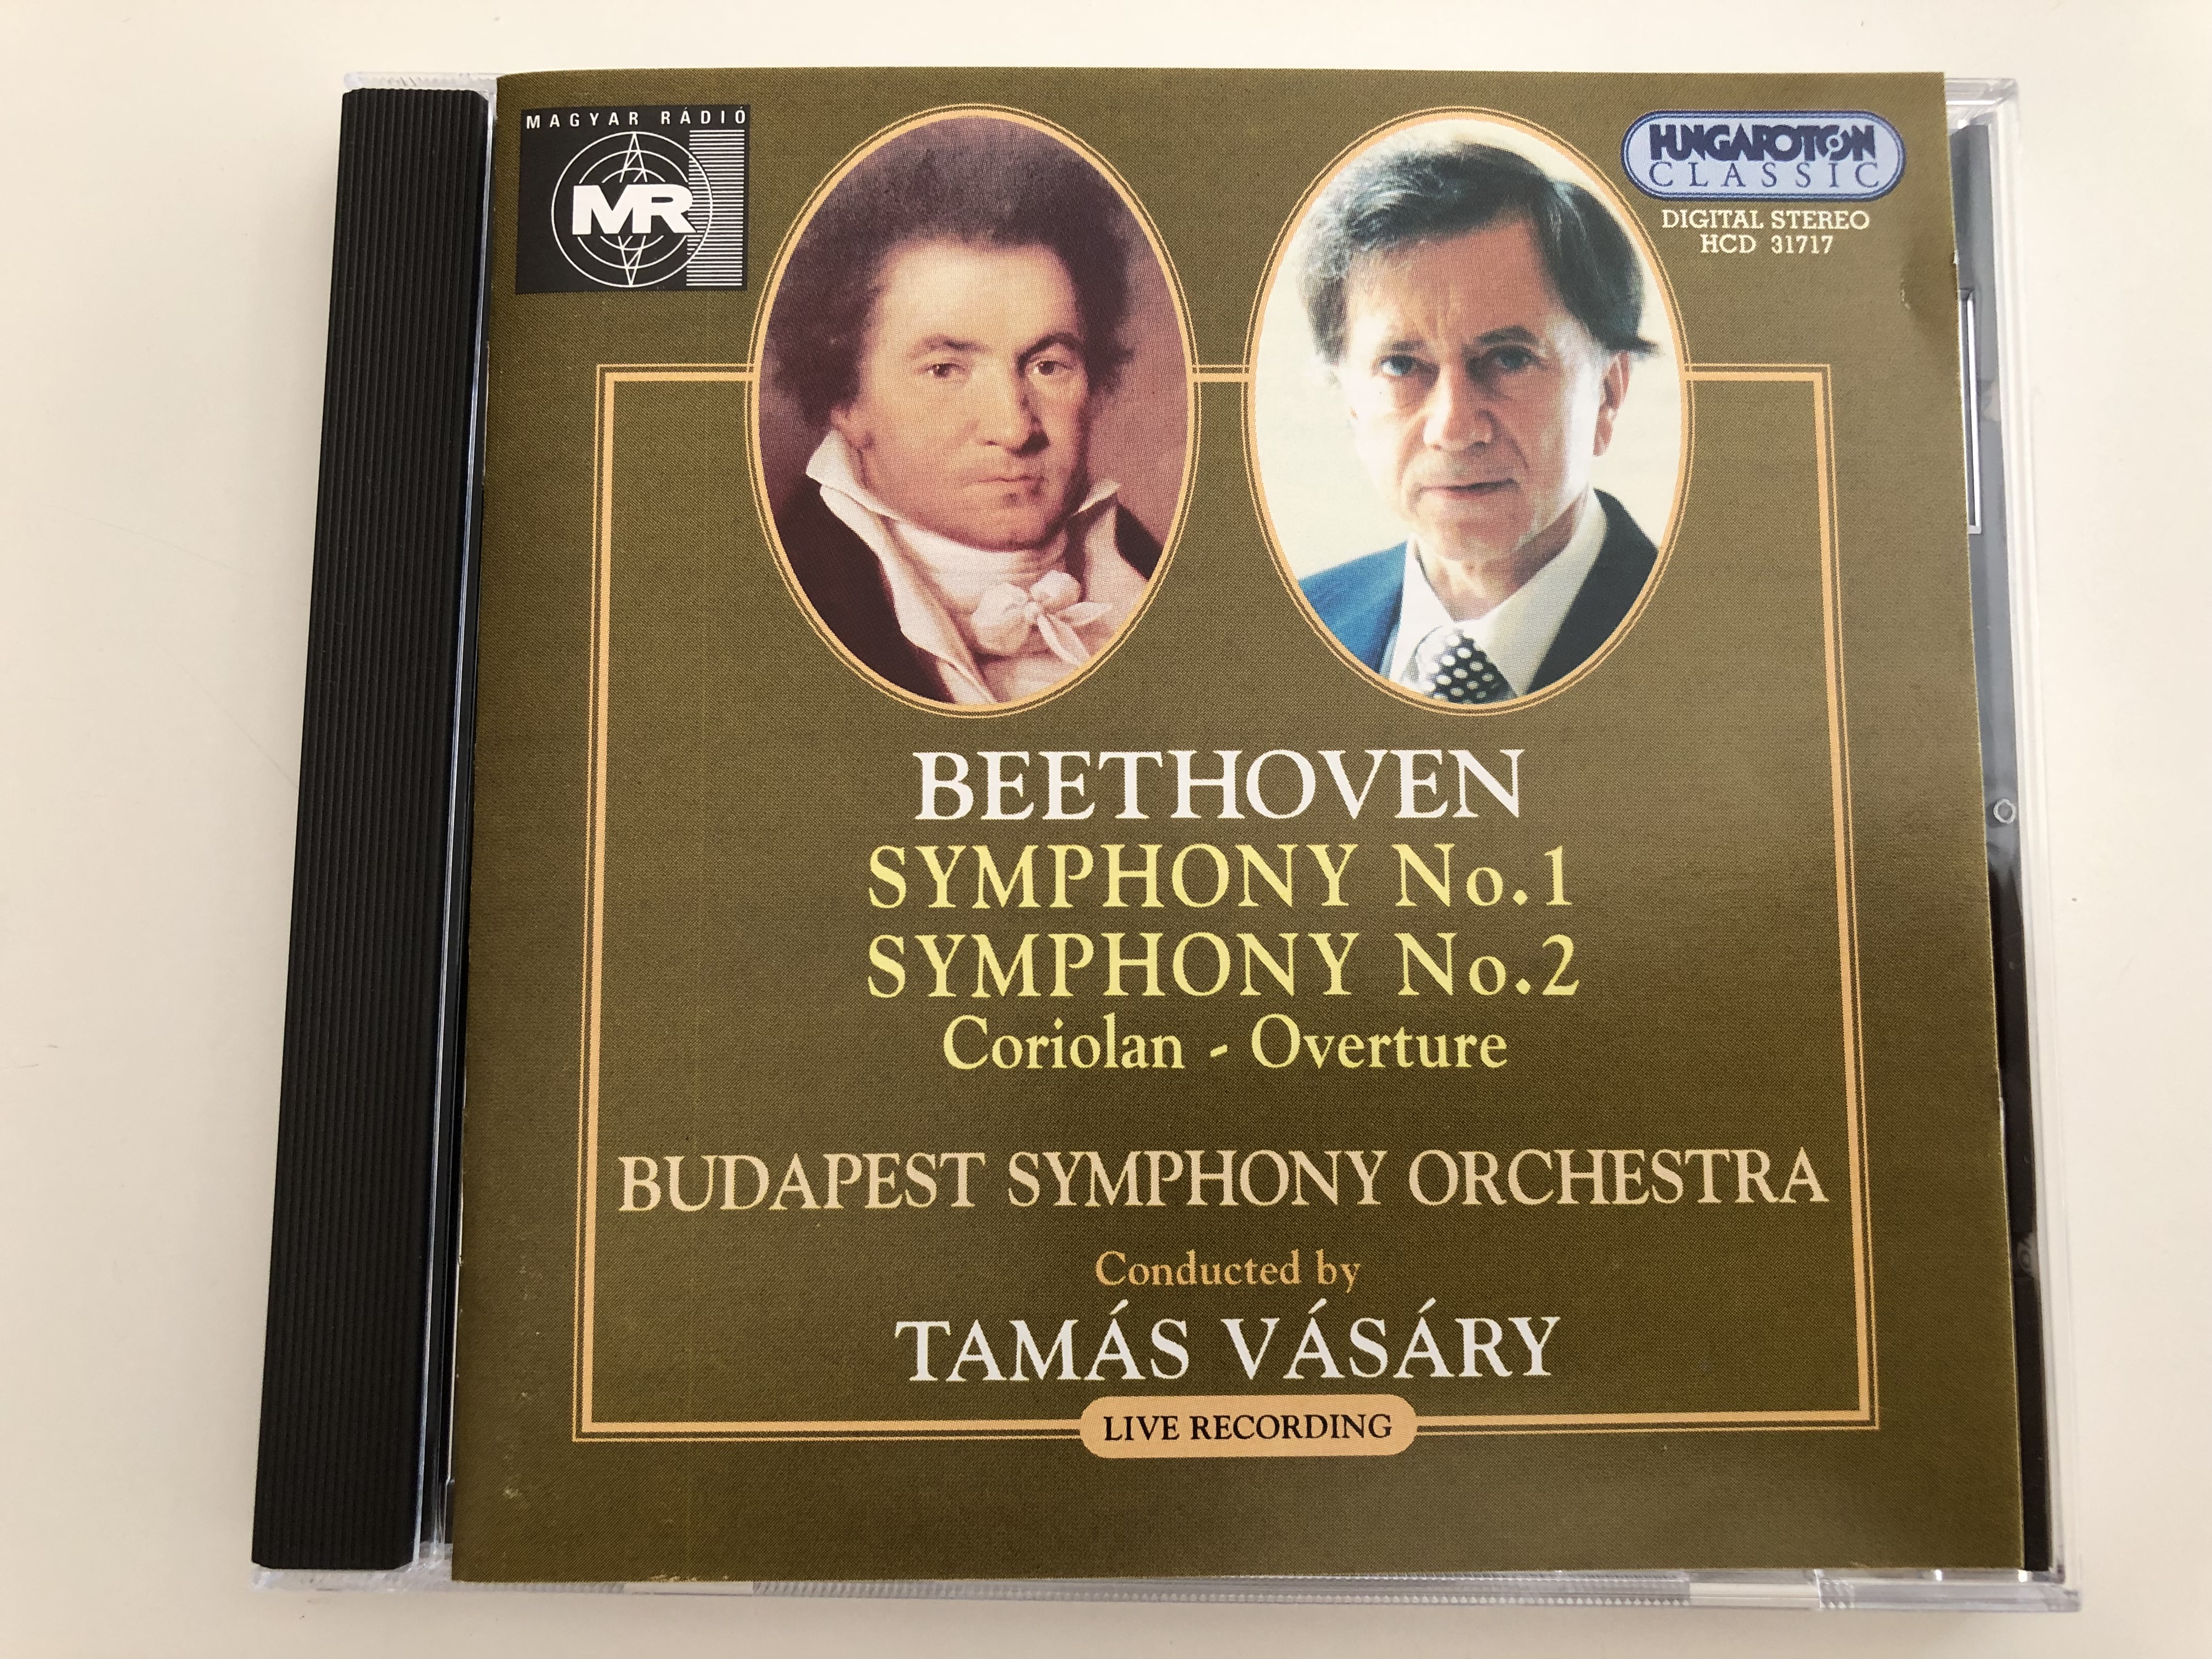 beethoven-symphony-no.-1-no.-2-coriolan-overture-budapest-symphony-orchestra-conducted-by-tam-s-v-s-ry-hungaroton-classic-audio-cd-1997-hcd-31717-live-recording-1-.jpg